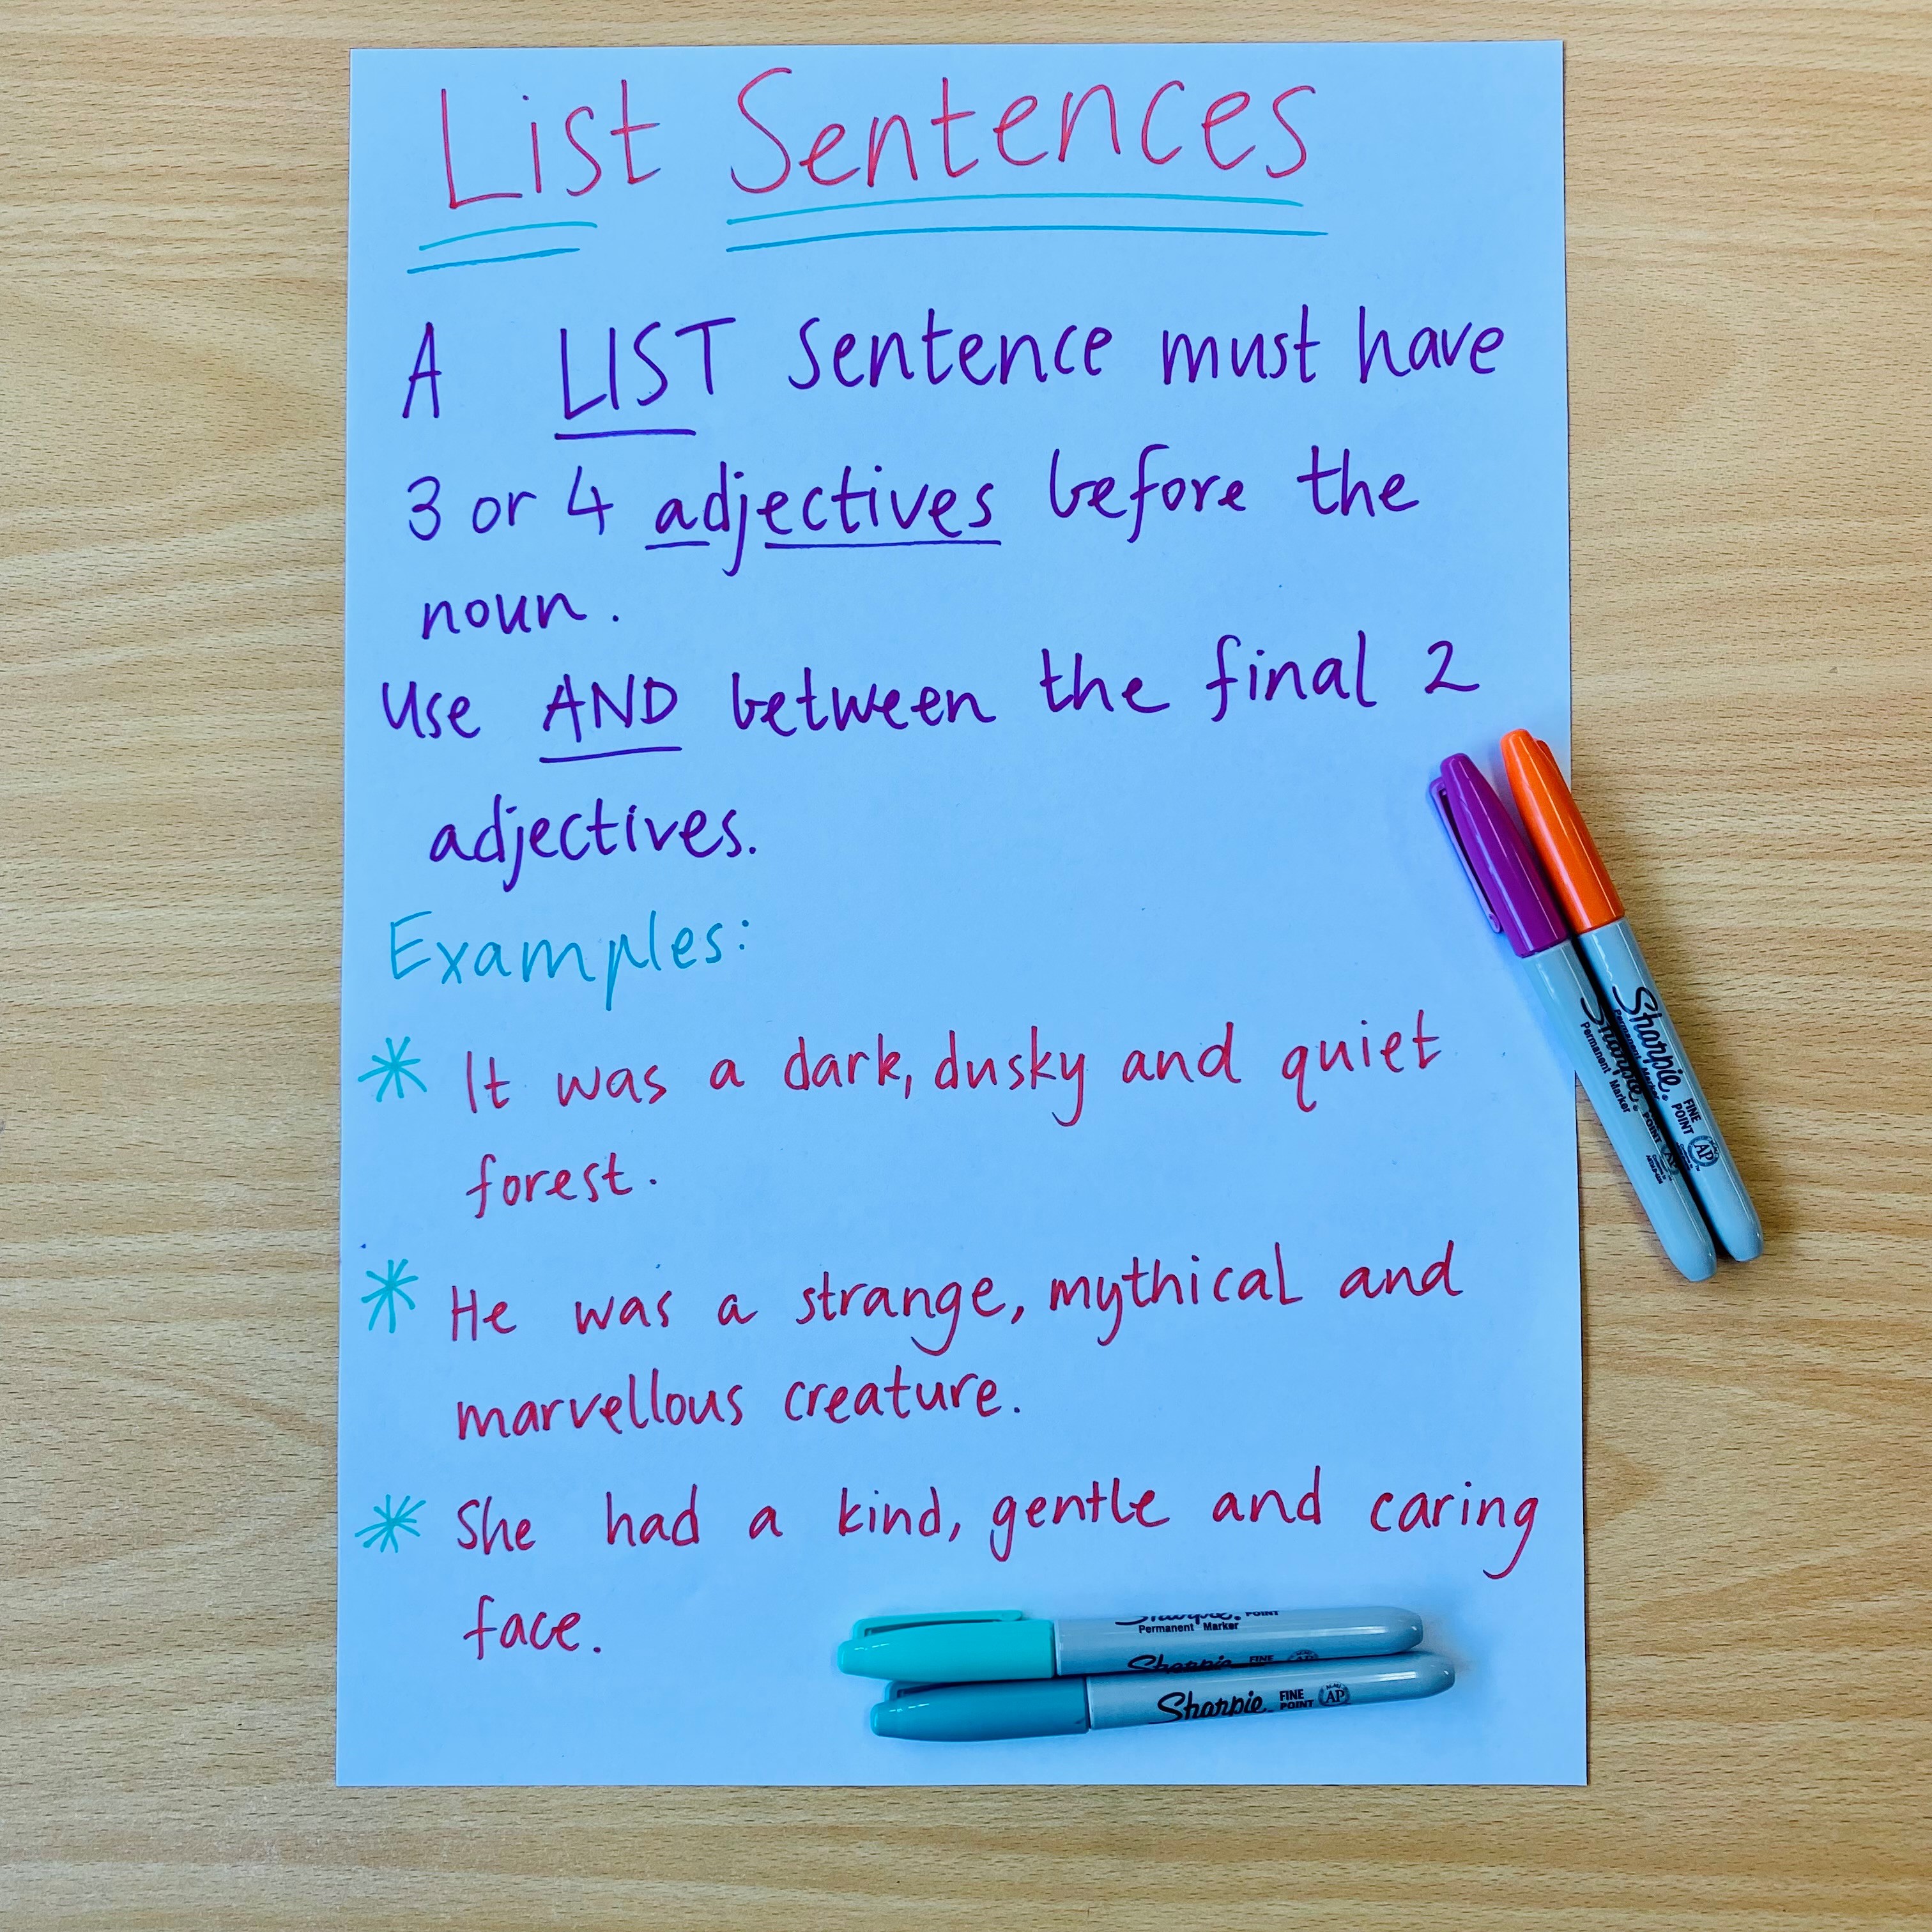 A succinct writing lesson to support students to write engaging sentences, following the List Sentence structure. The lesson equips students with the skills required to construct a range of varied sentence types, using 3-4 adjectives to describe a noun.